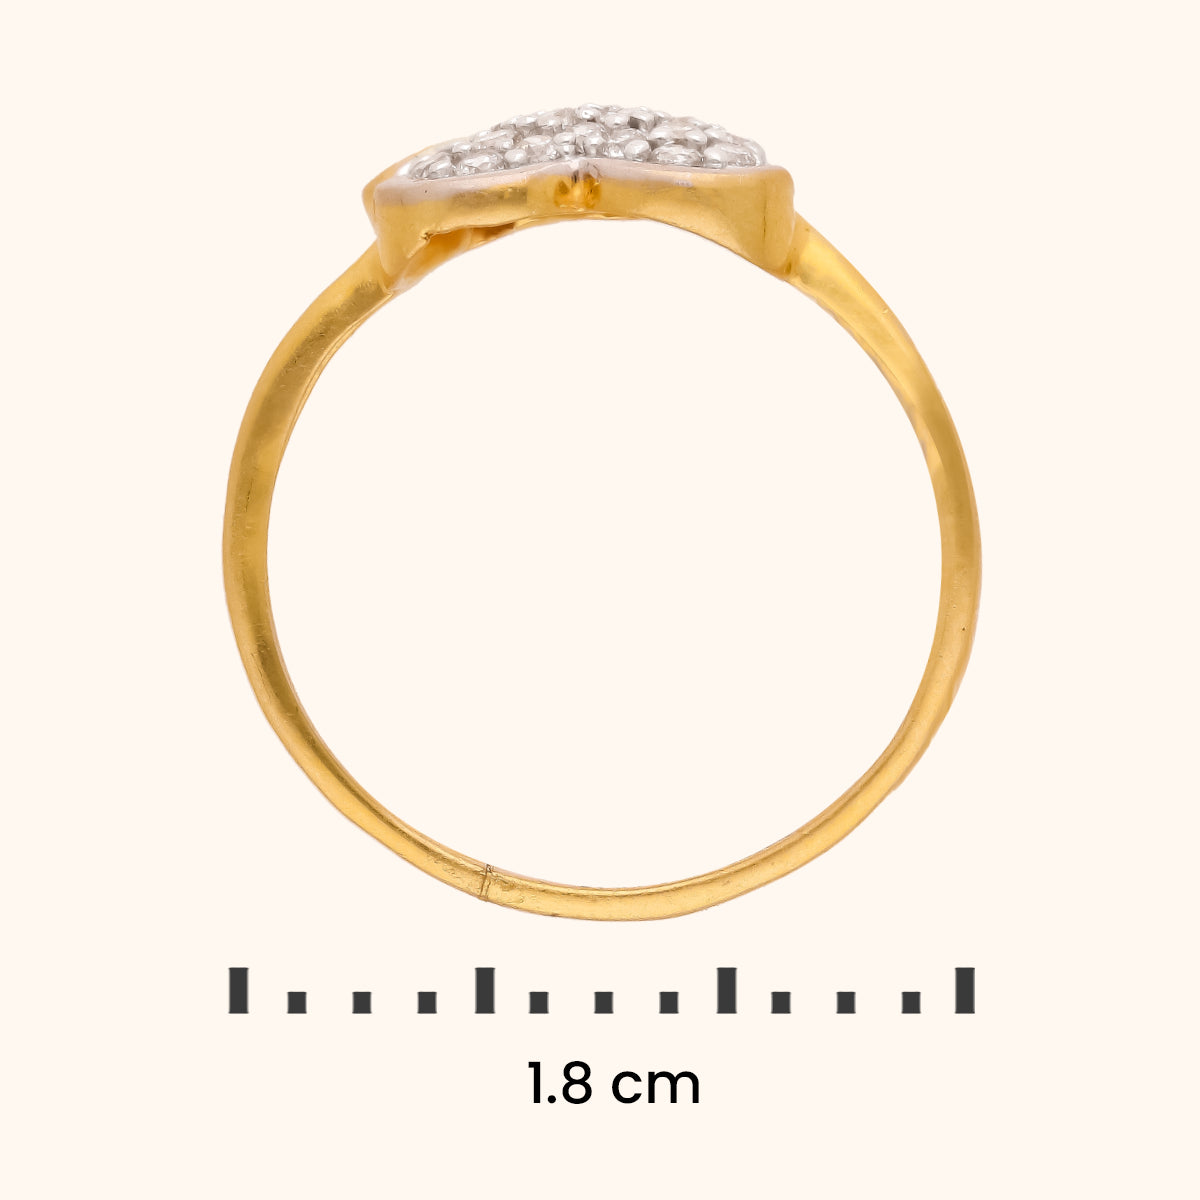 Buy quality 916 Gold Unique Ring in Ahmedabad